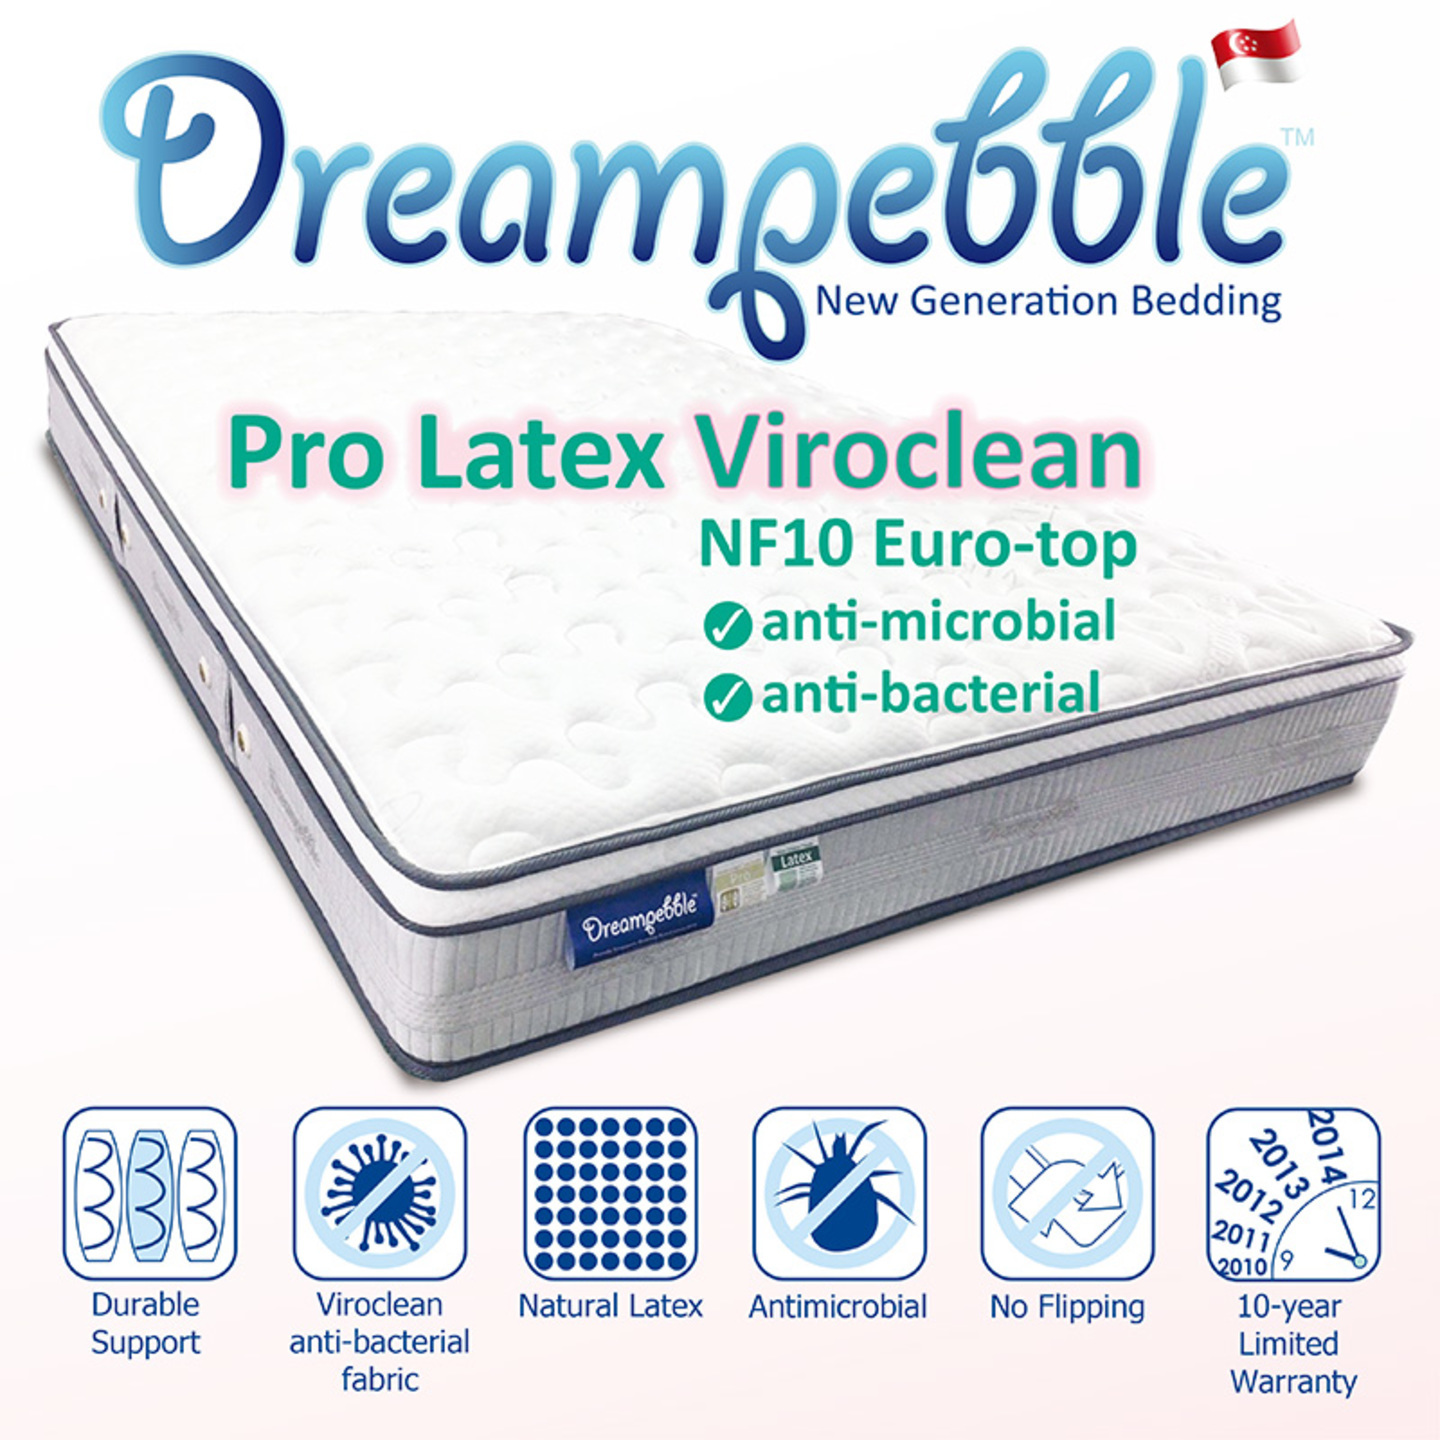 Dreampebble Pro Latex Viroclean Mattress - Available in NF5  NF10 Euro-top - FREE Dreami pillows & 100 Cotton Sateen white Bed Sheet Set in 400TC